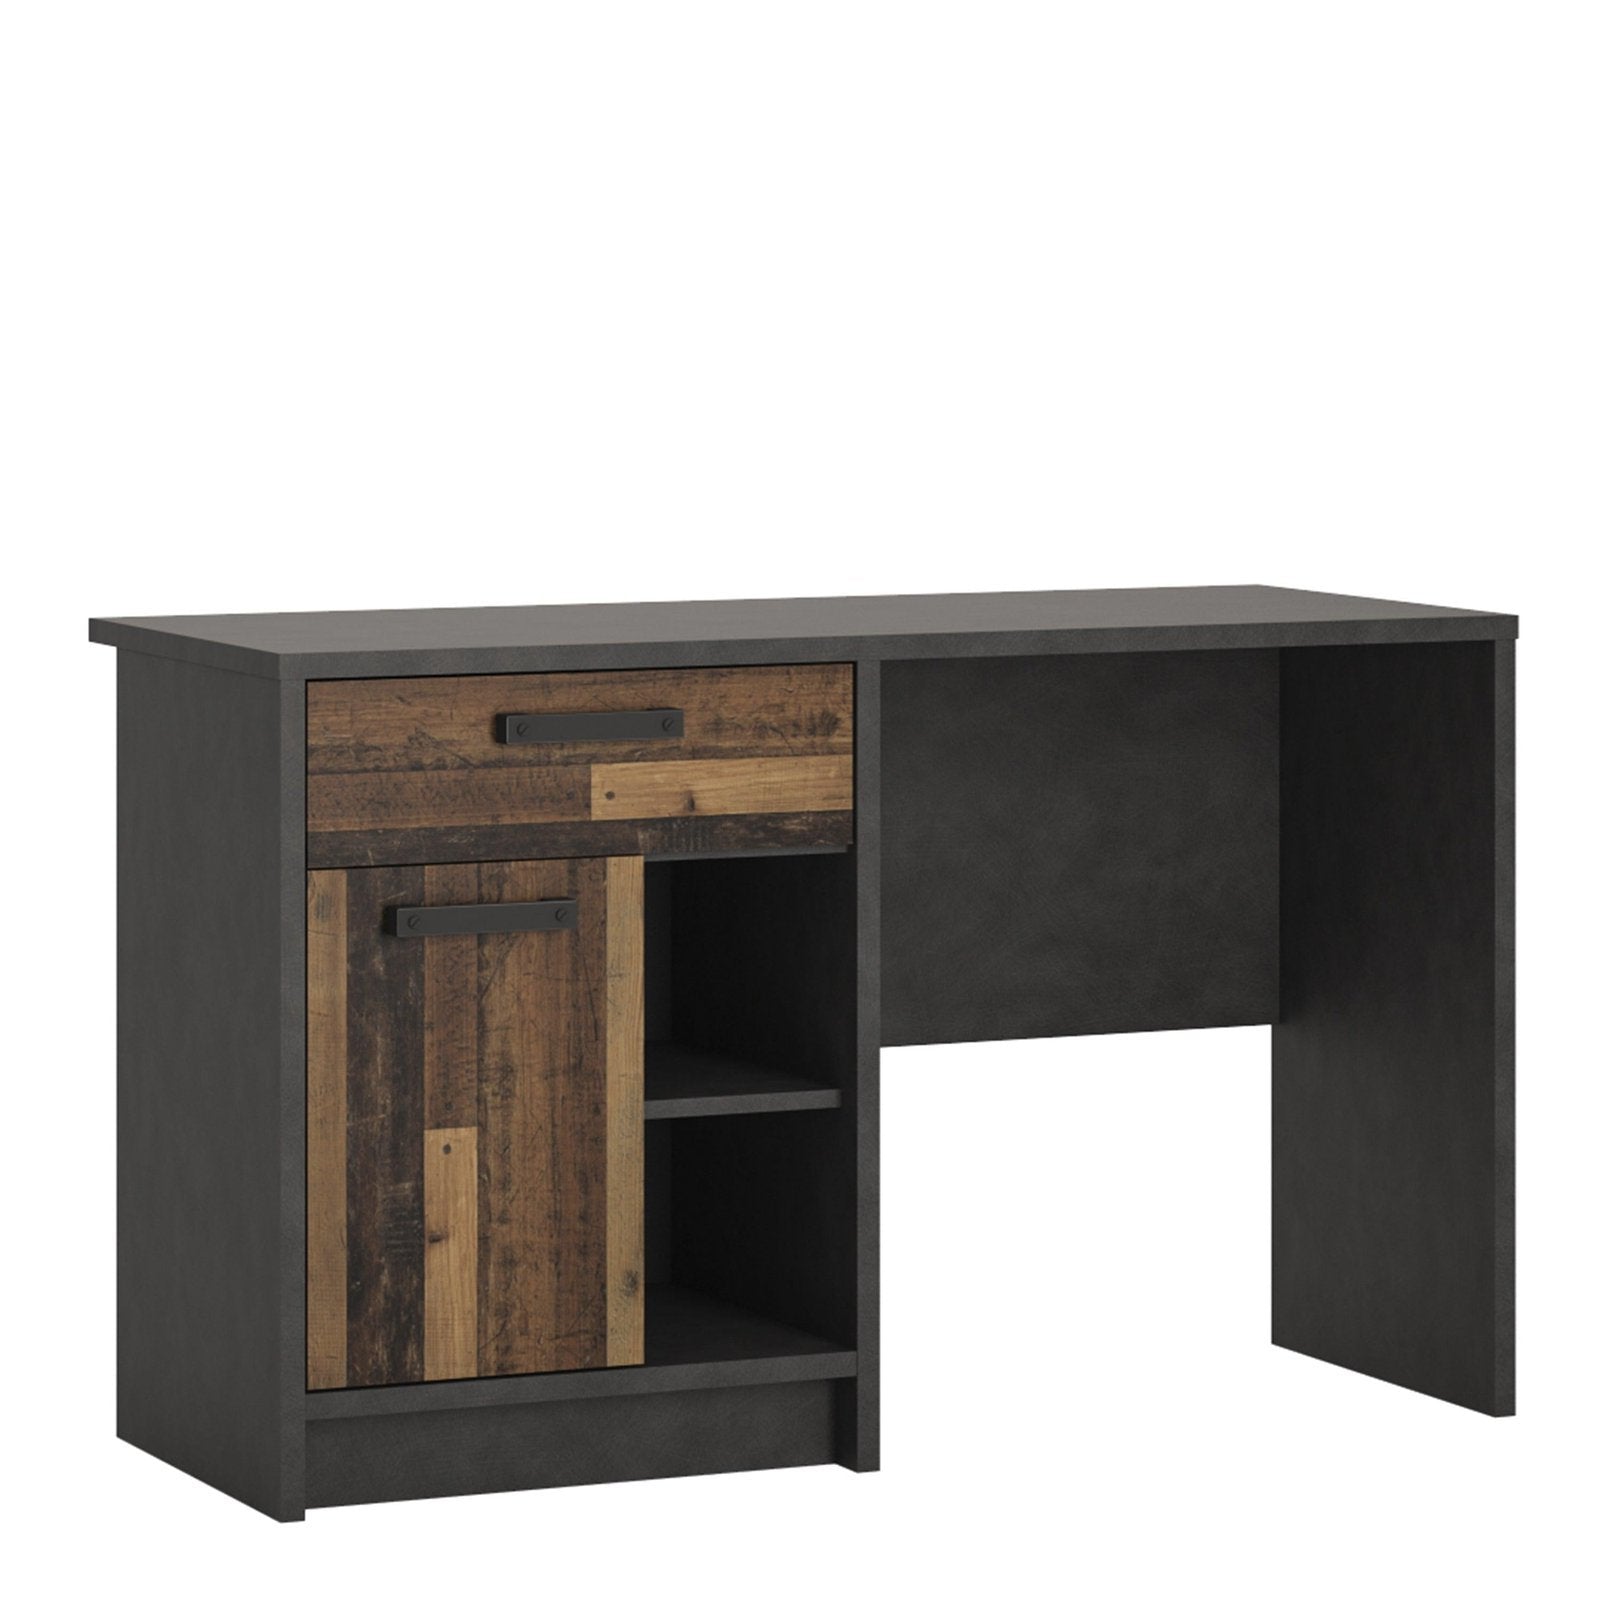 Brooklyn Desk with 1 Door and 1 Drawer in Walnut and Dark Matera Grey